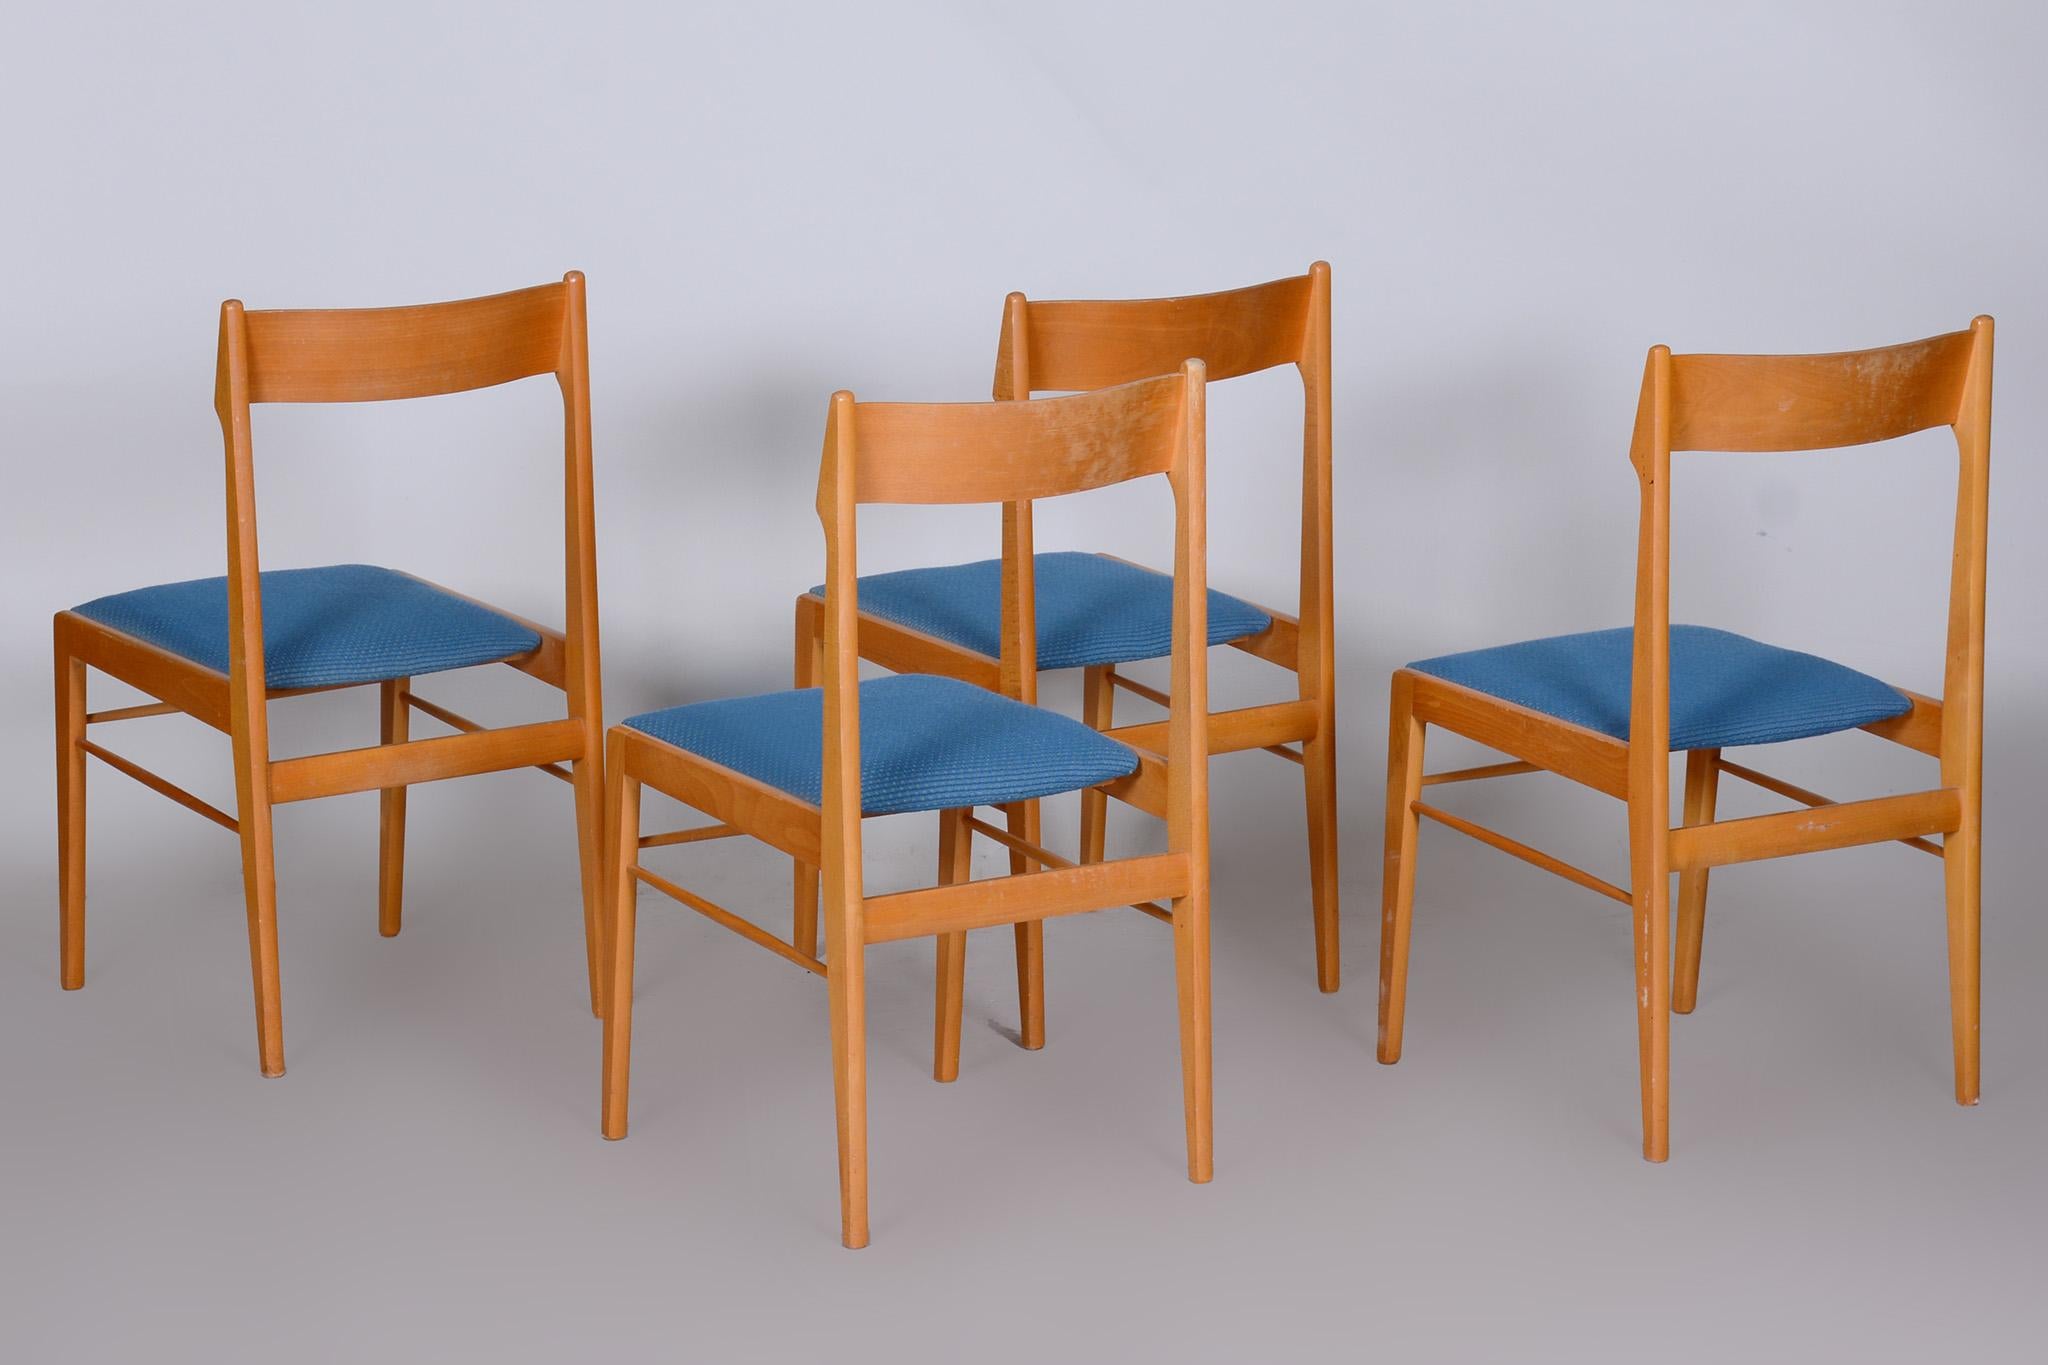 Blue and Brown Dining Chairs 4 Pcs, Well Preserved Original Condition, 1950s For Sale 2